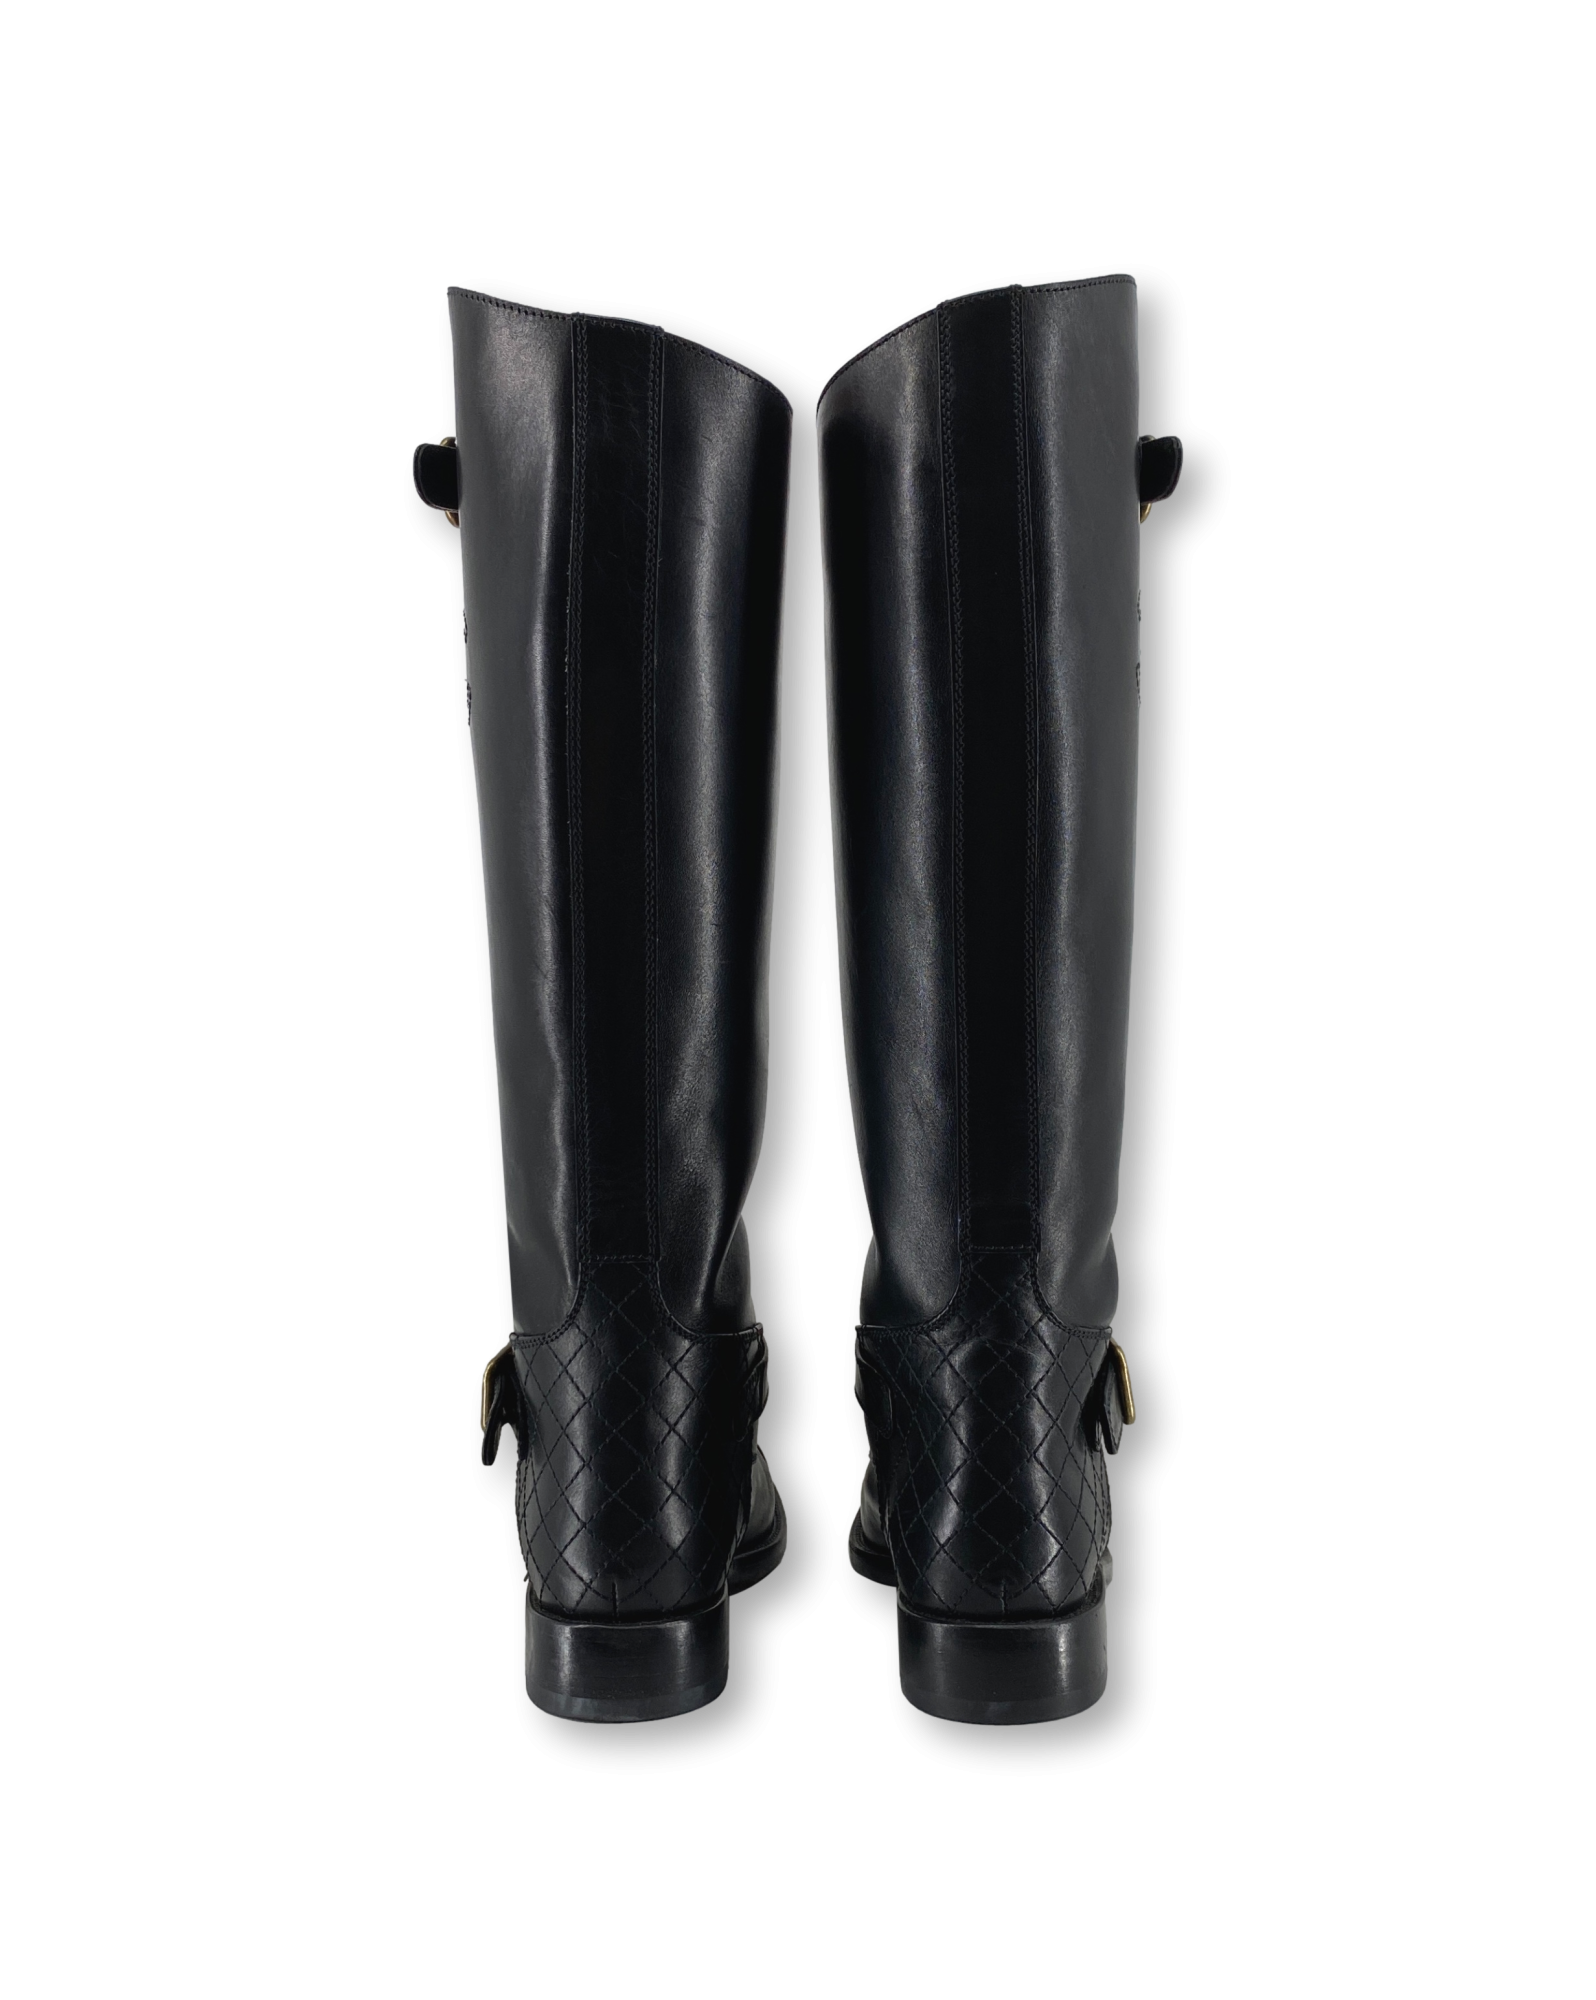 Chanel riding Boots Black Leather